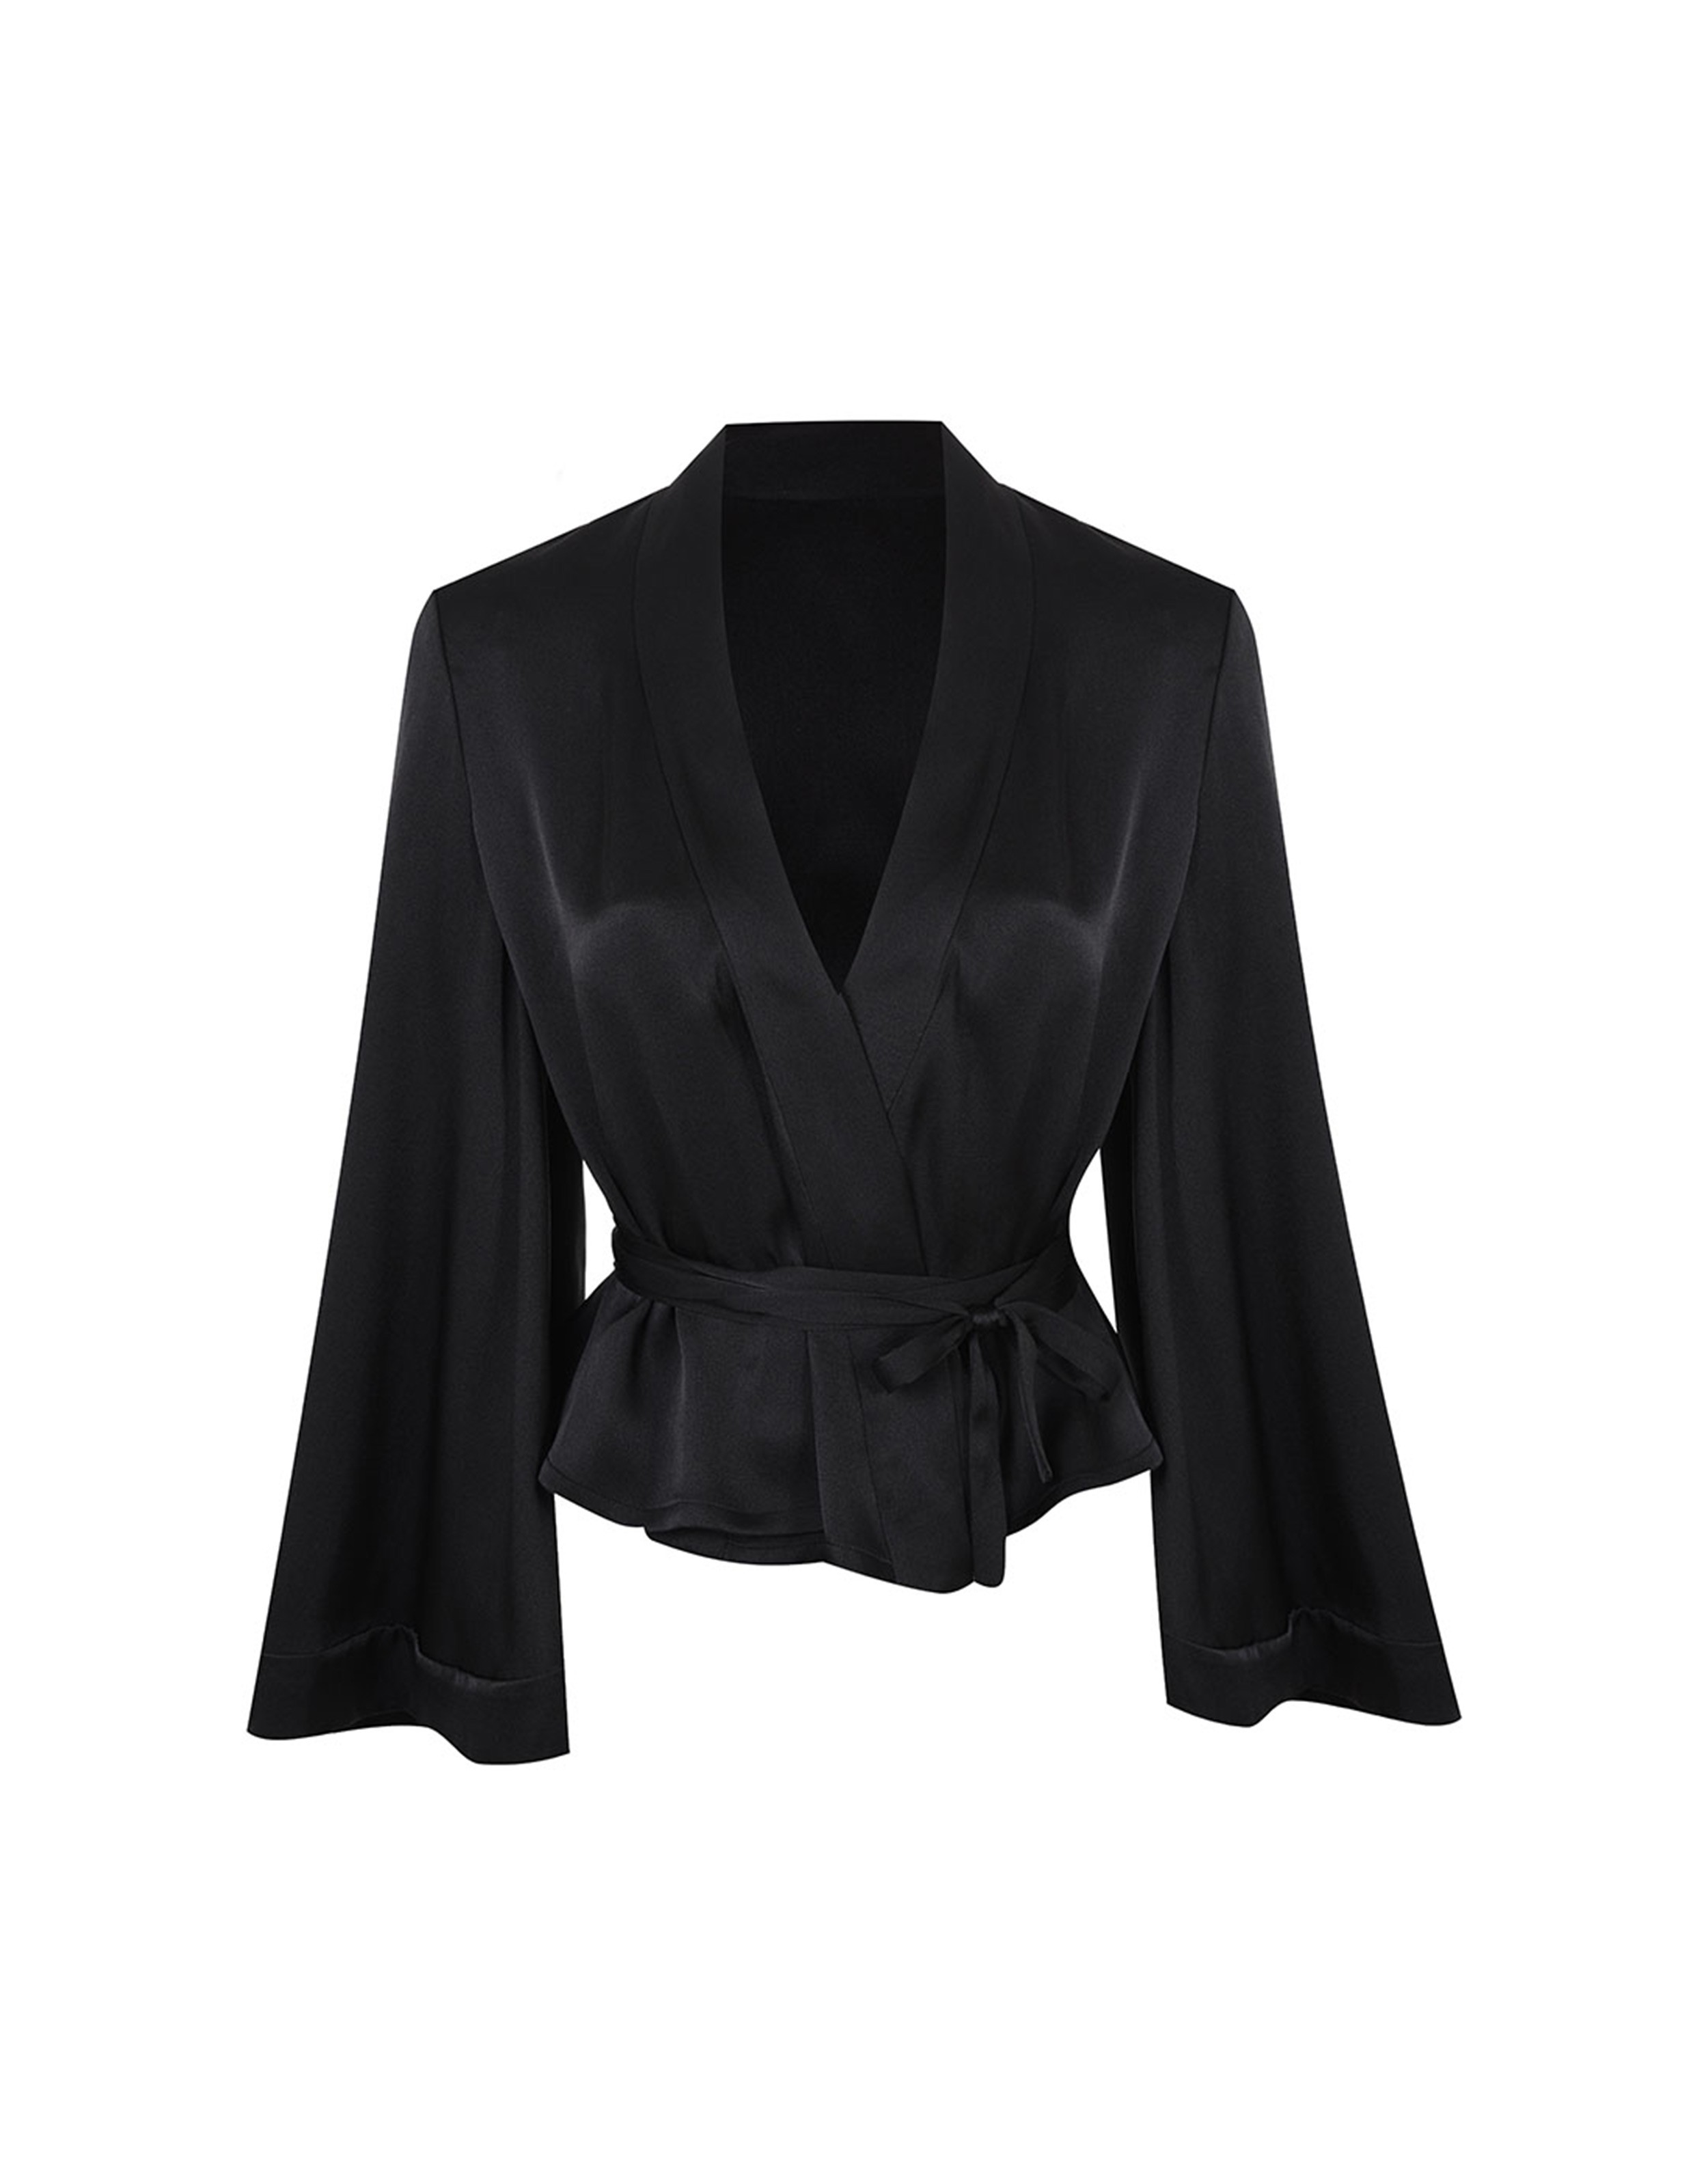 Laly Jacket in Black | Agent Provocateur Outlet